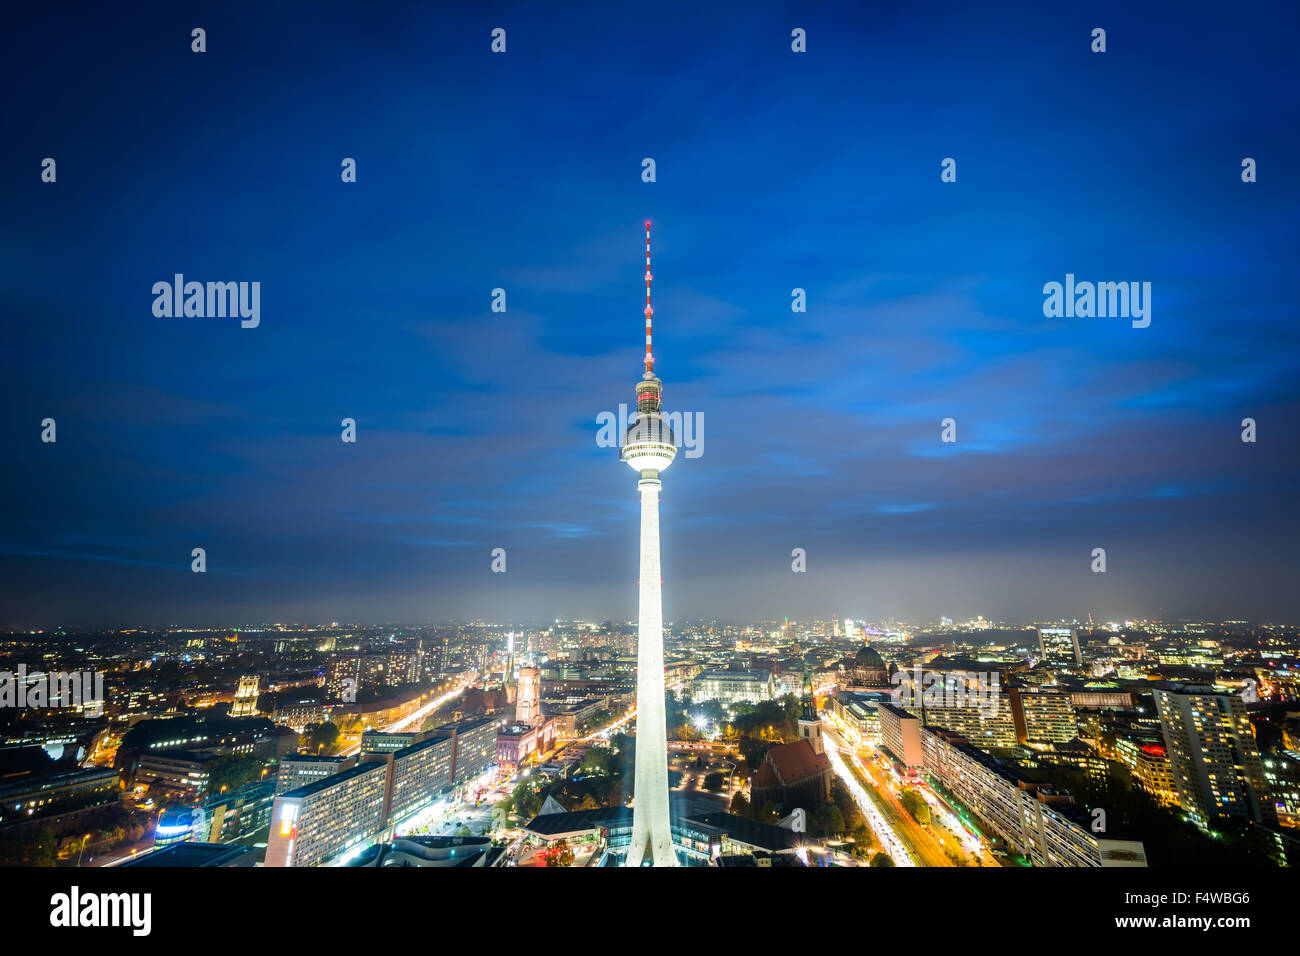 View of the Berlin TV Tower (Fernsehturm) at night, in Mitte, Berlin, Germany. Stock Photo